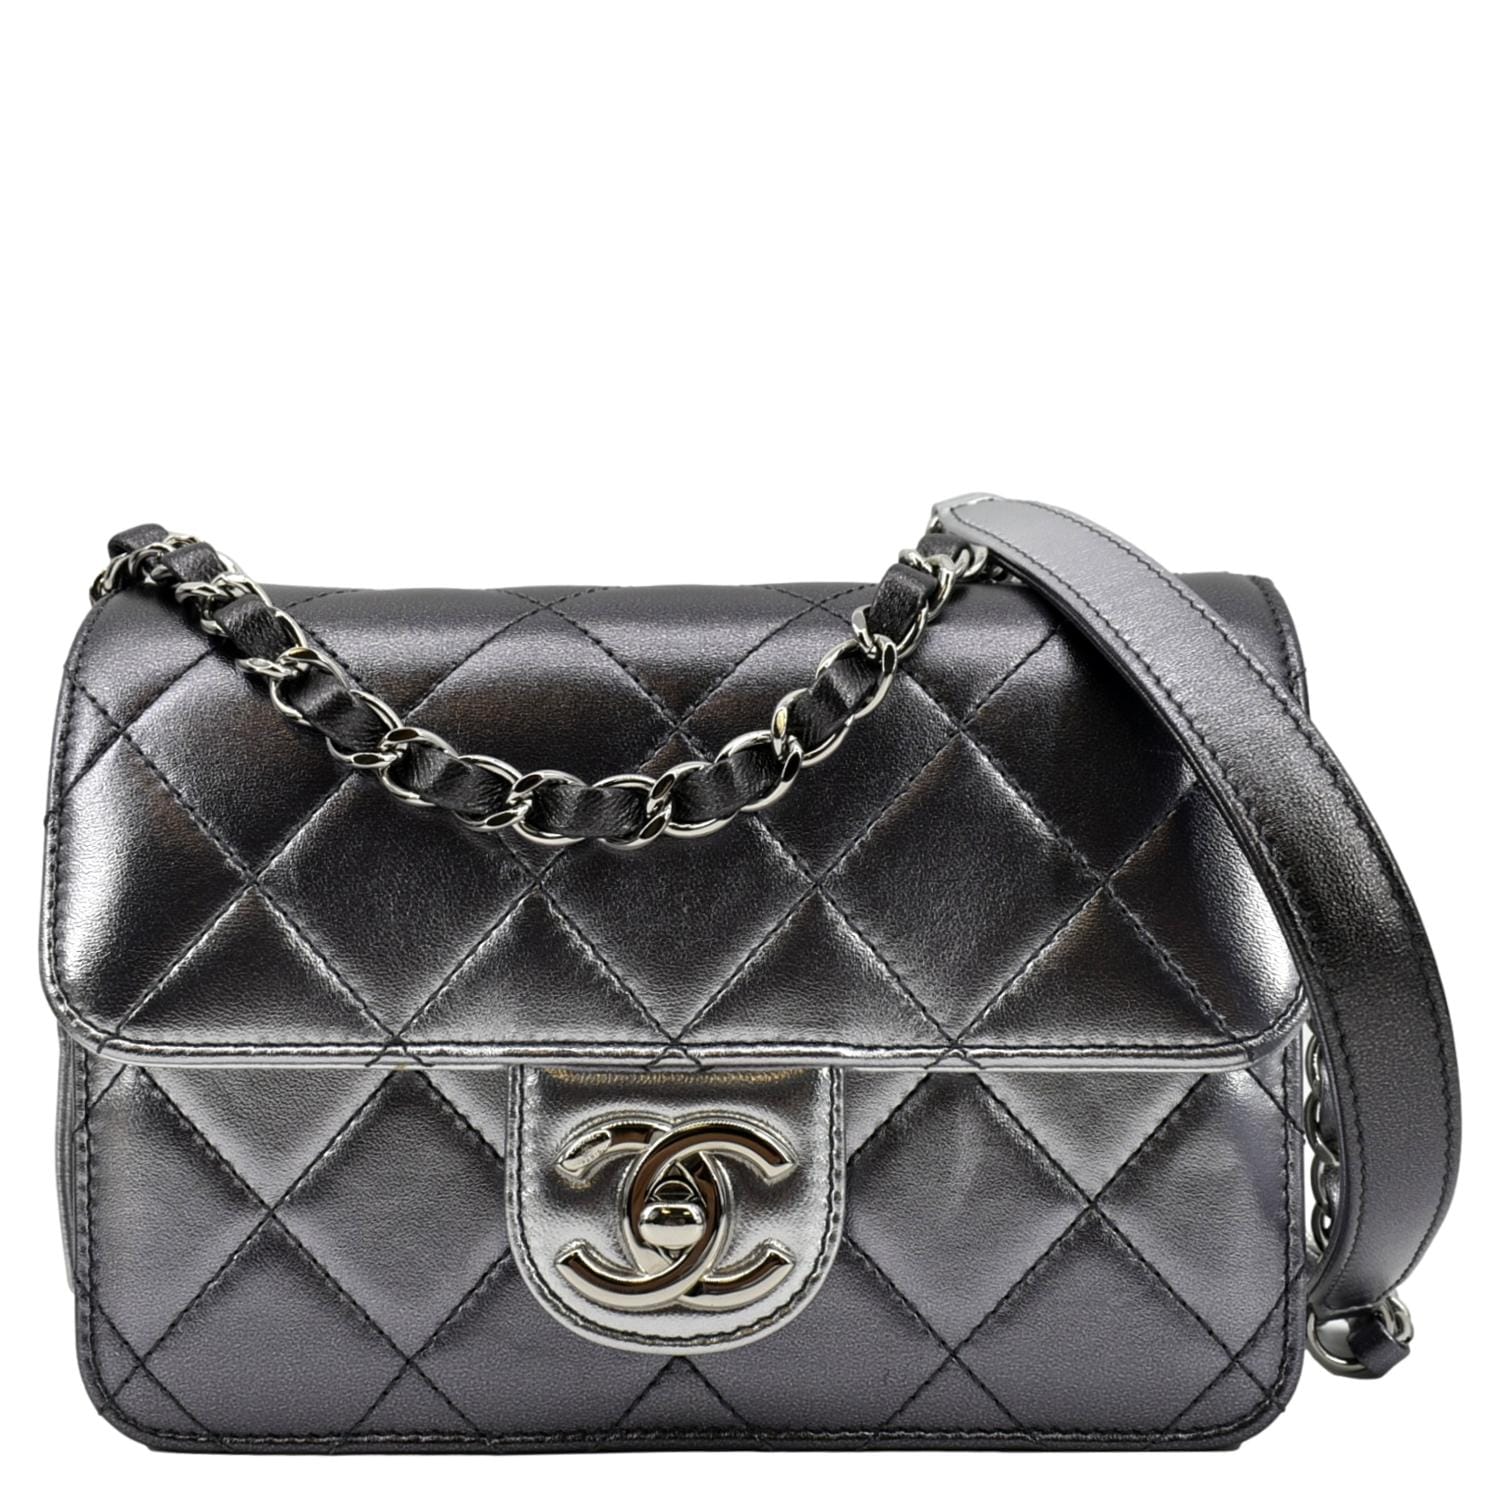 Chanel Silver Metallic Lambskin Quilted 10 Medium Double Flap